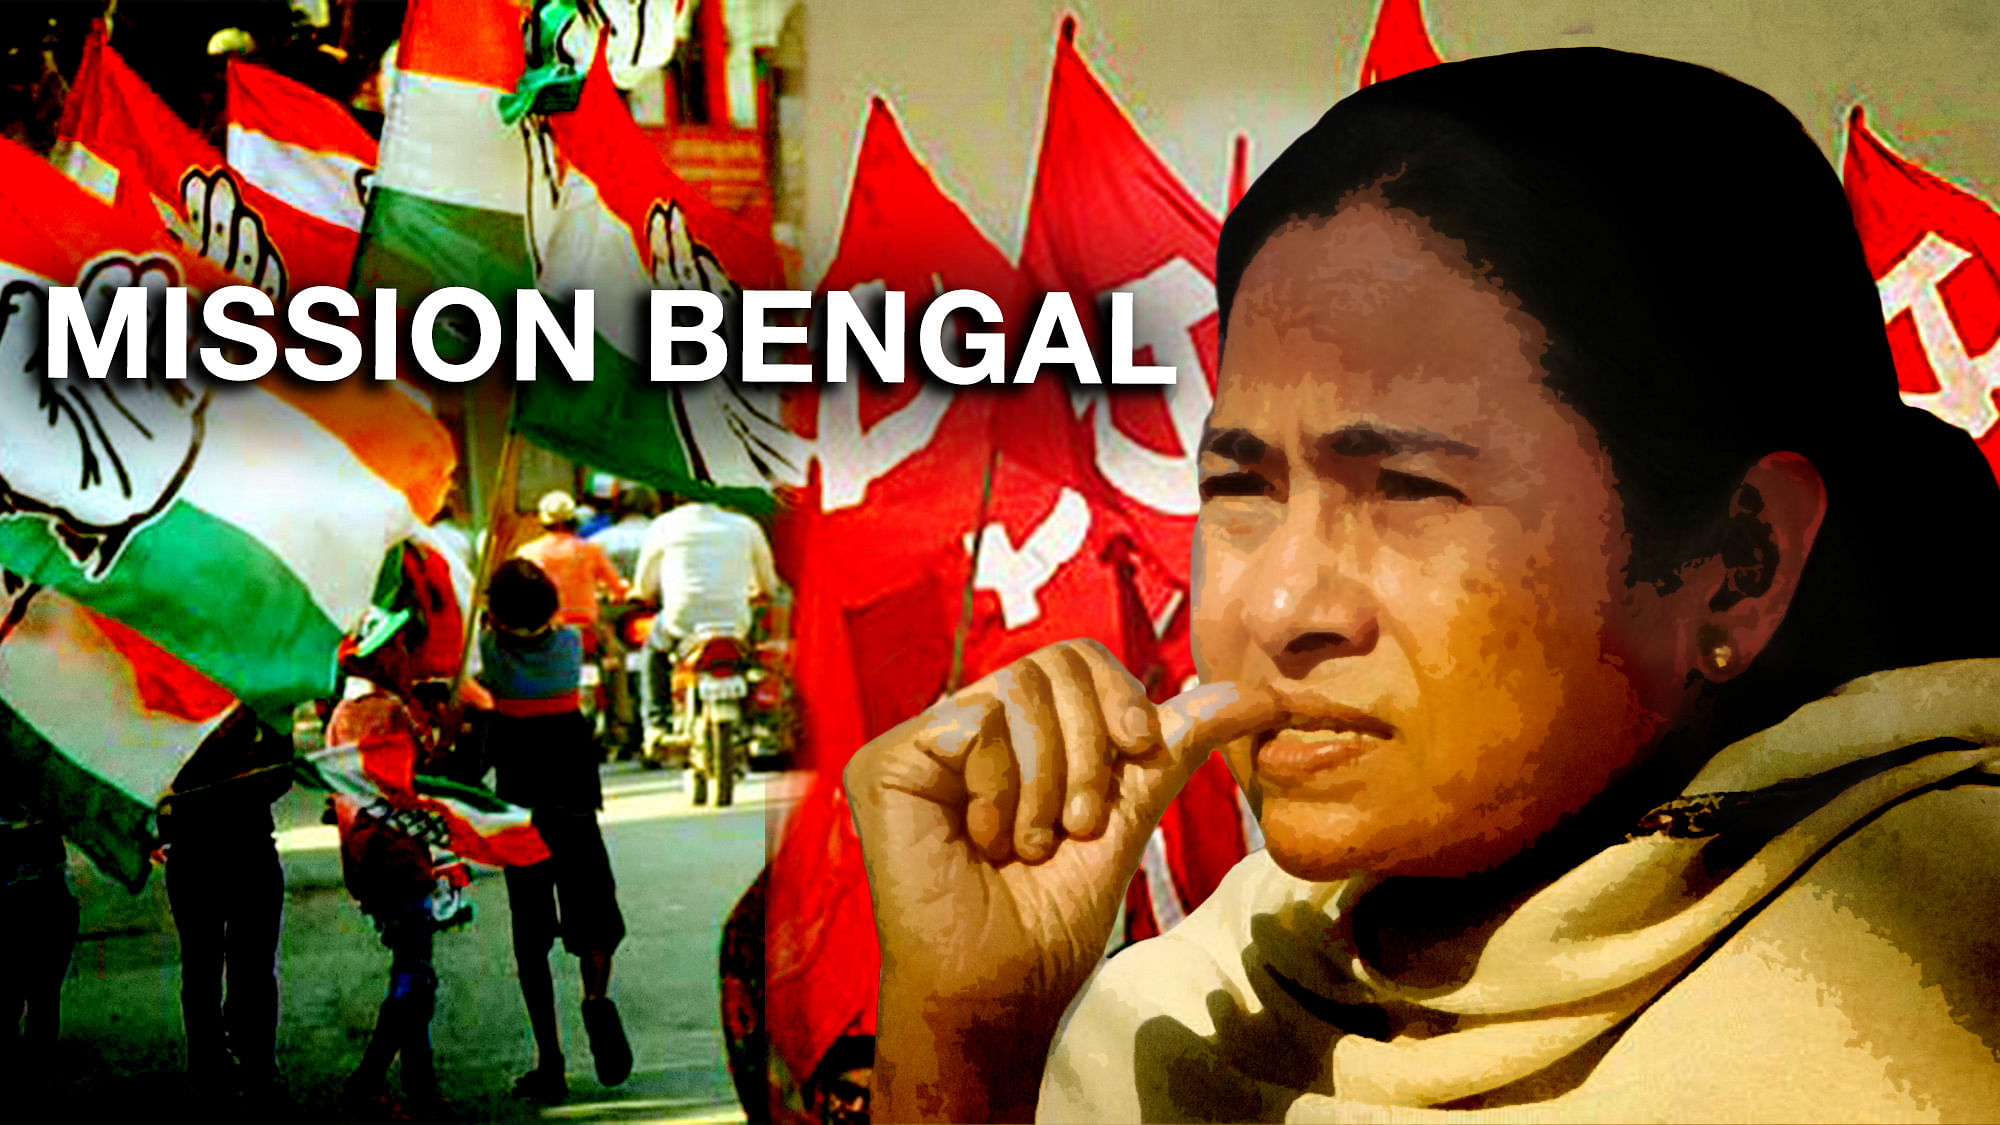 This election in West Bengal is important for Mamata Banerjee. (Photo: TheQuint)